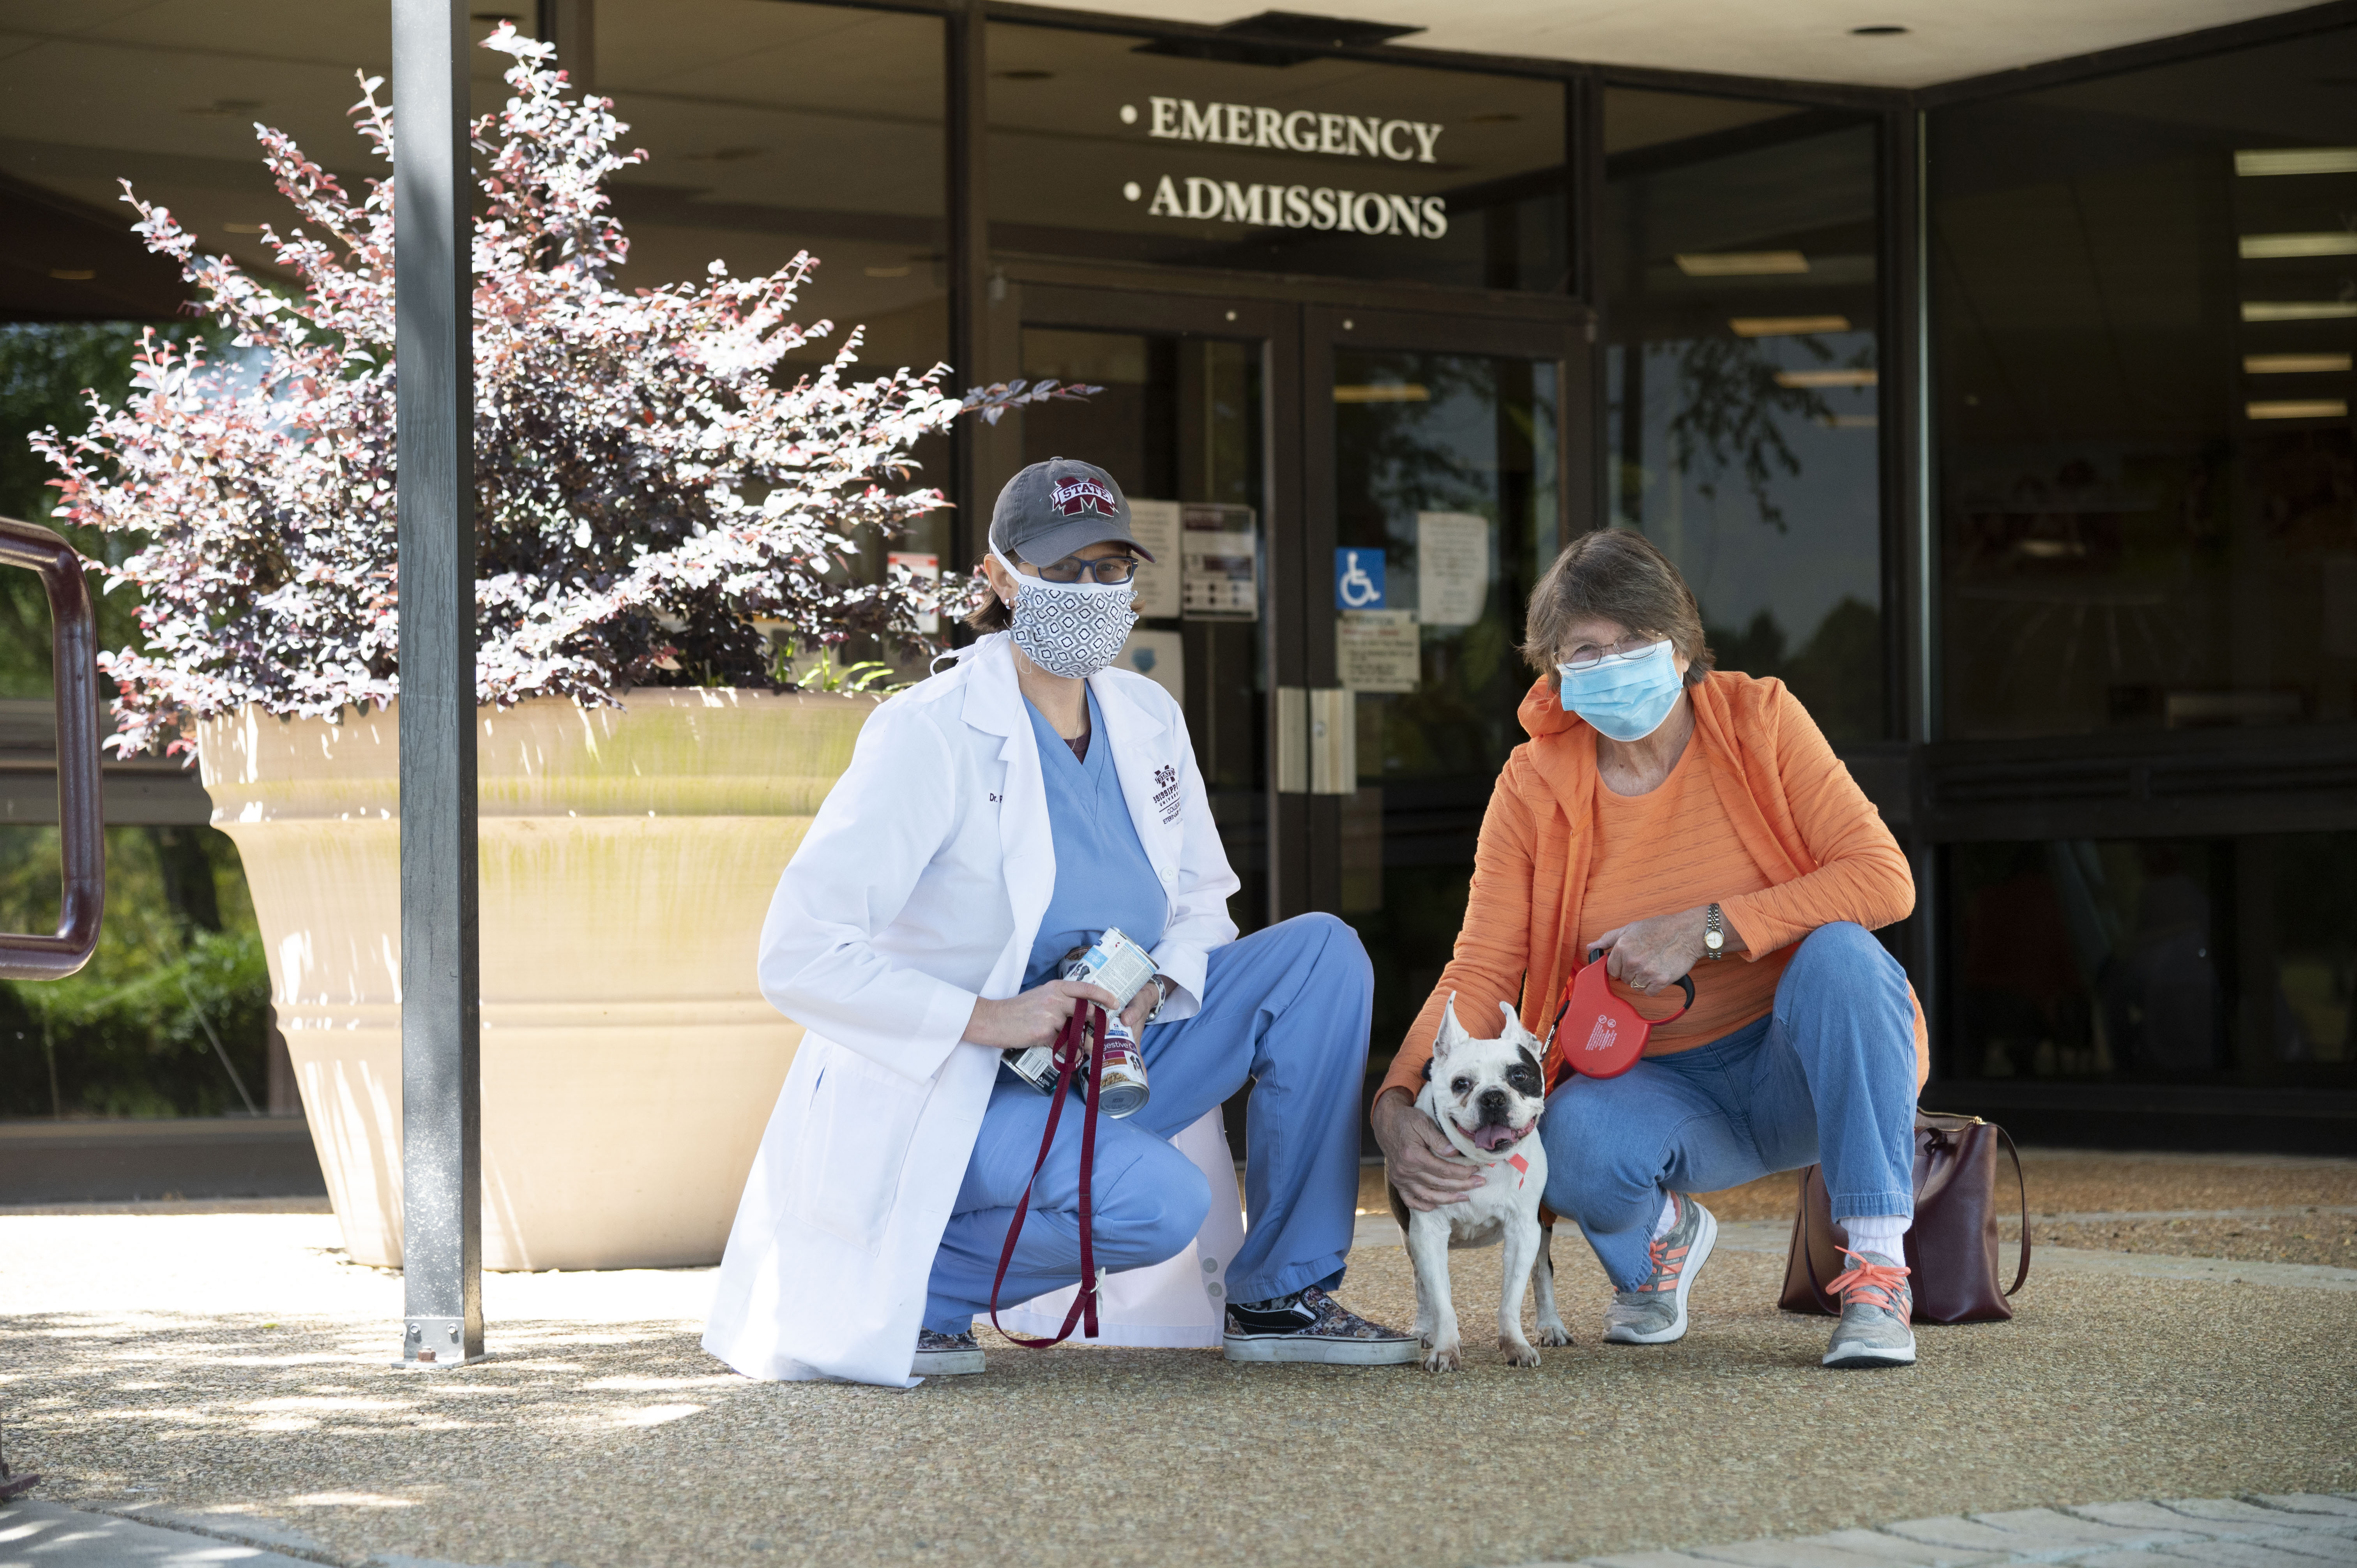 A veterinarian and client pose with masks on holding the patient